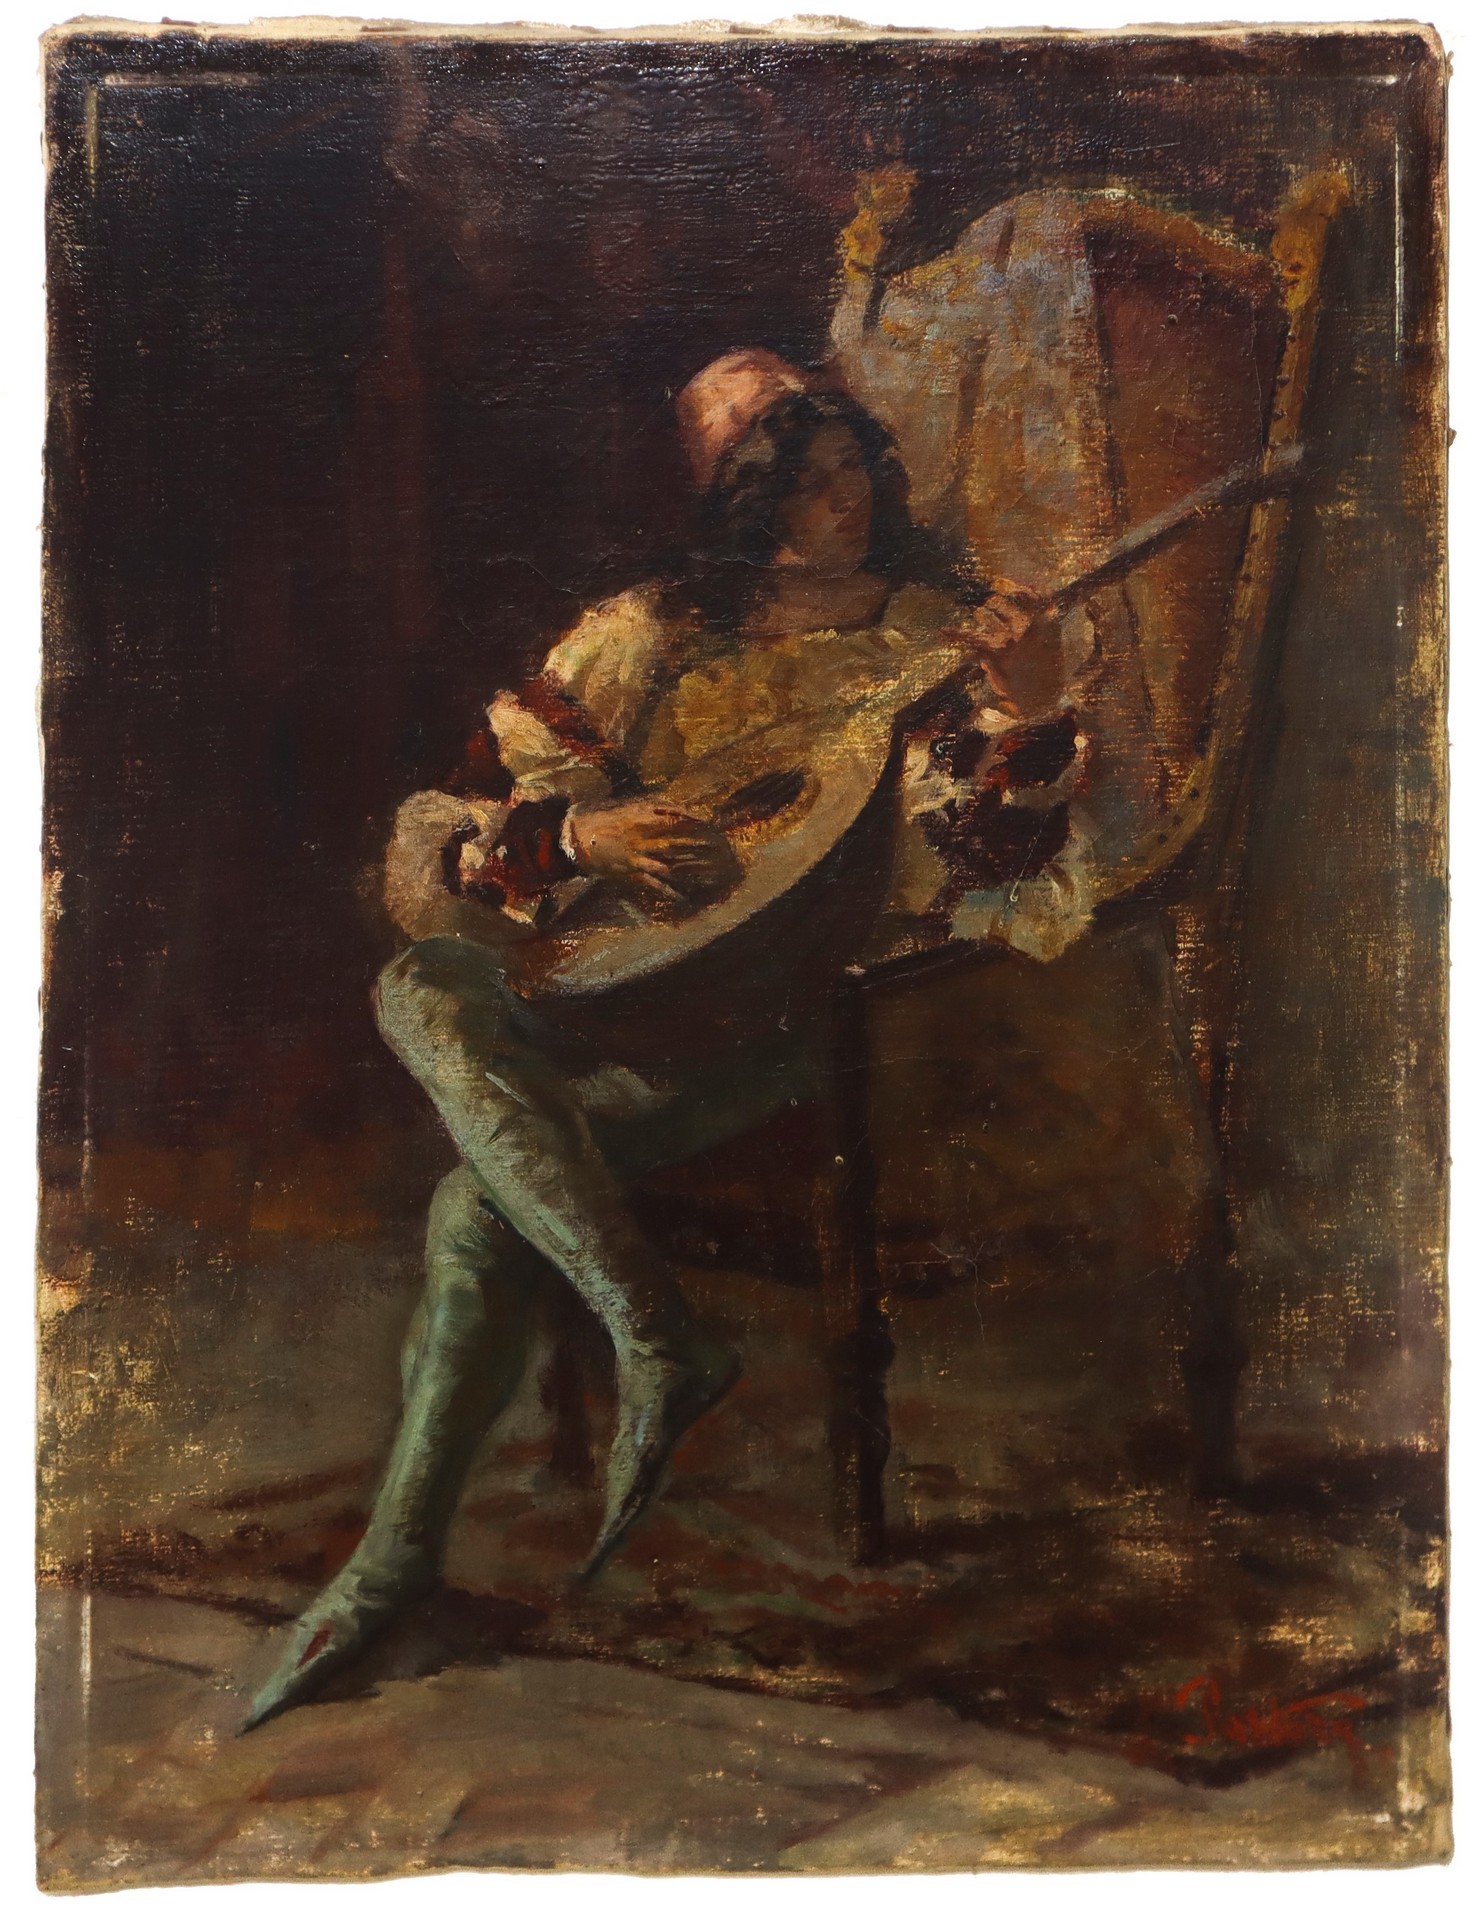 Lute player, Late 19th century